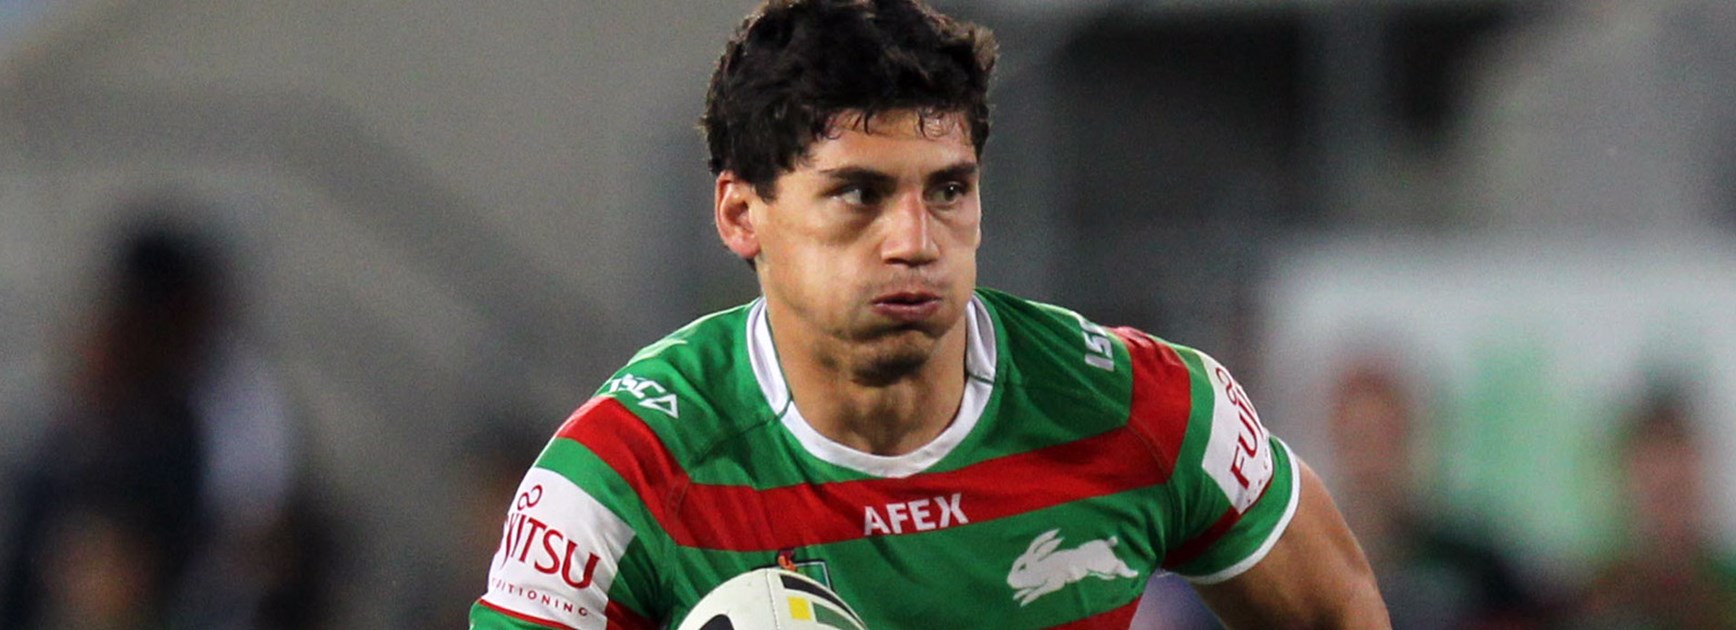 South Sydney forward Kyle Turner has been named to make his long-awaited return from injury in Round 21.